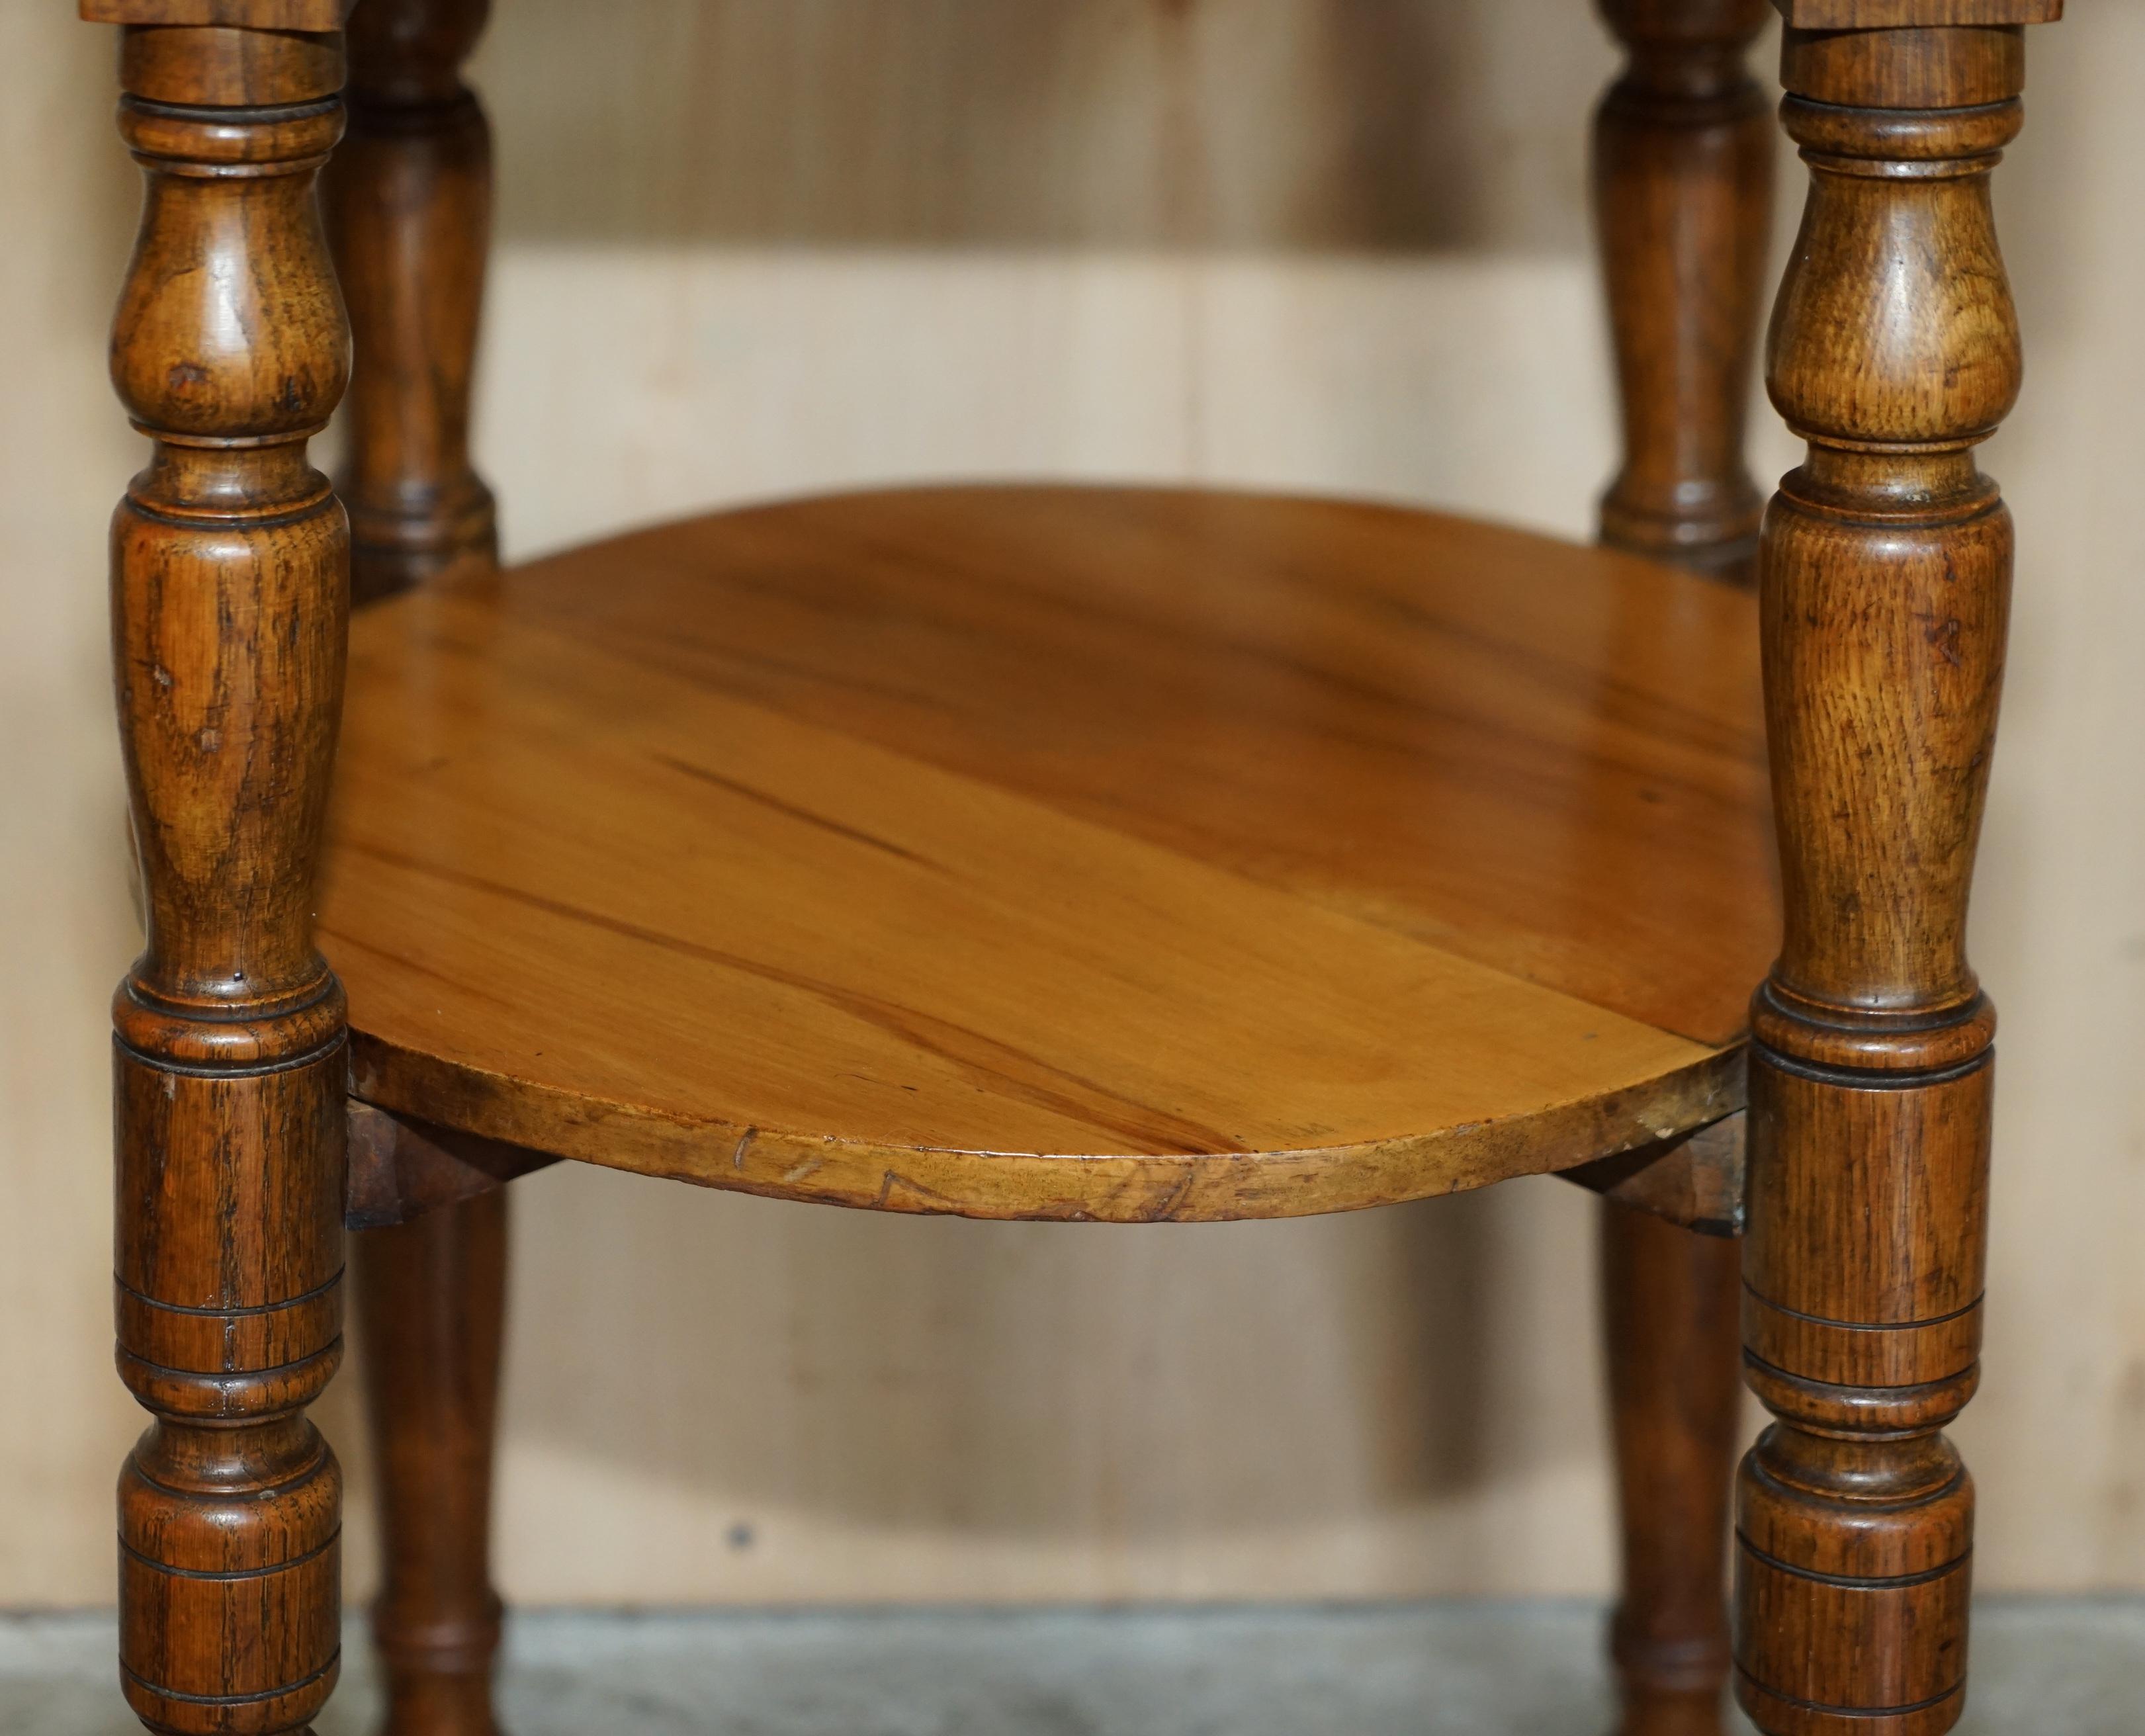 Hand-Crafted Lovely circa 1900 English Oak Side Table with Turned Legs and a Nice Rich Patina For Sale